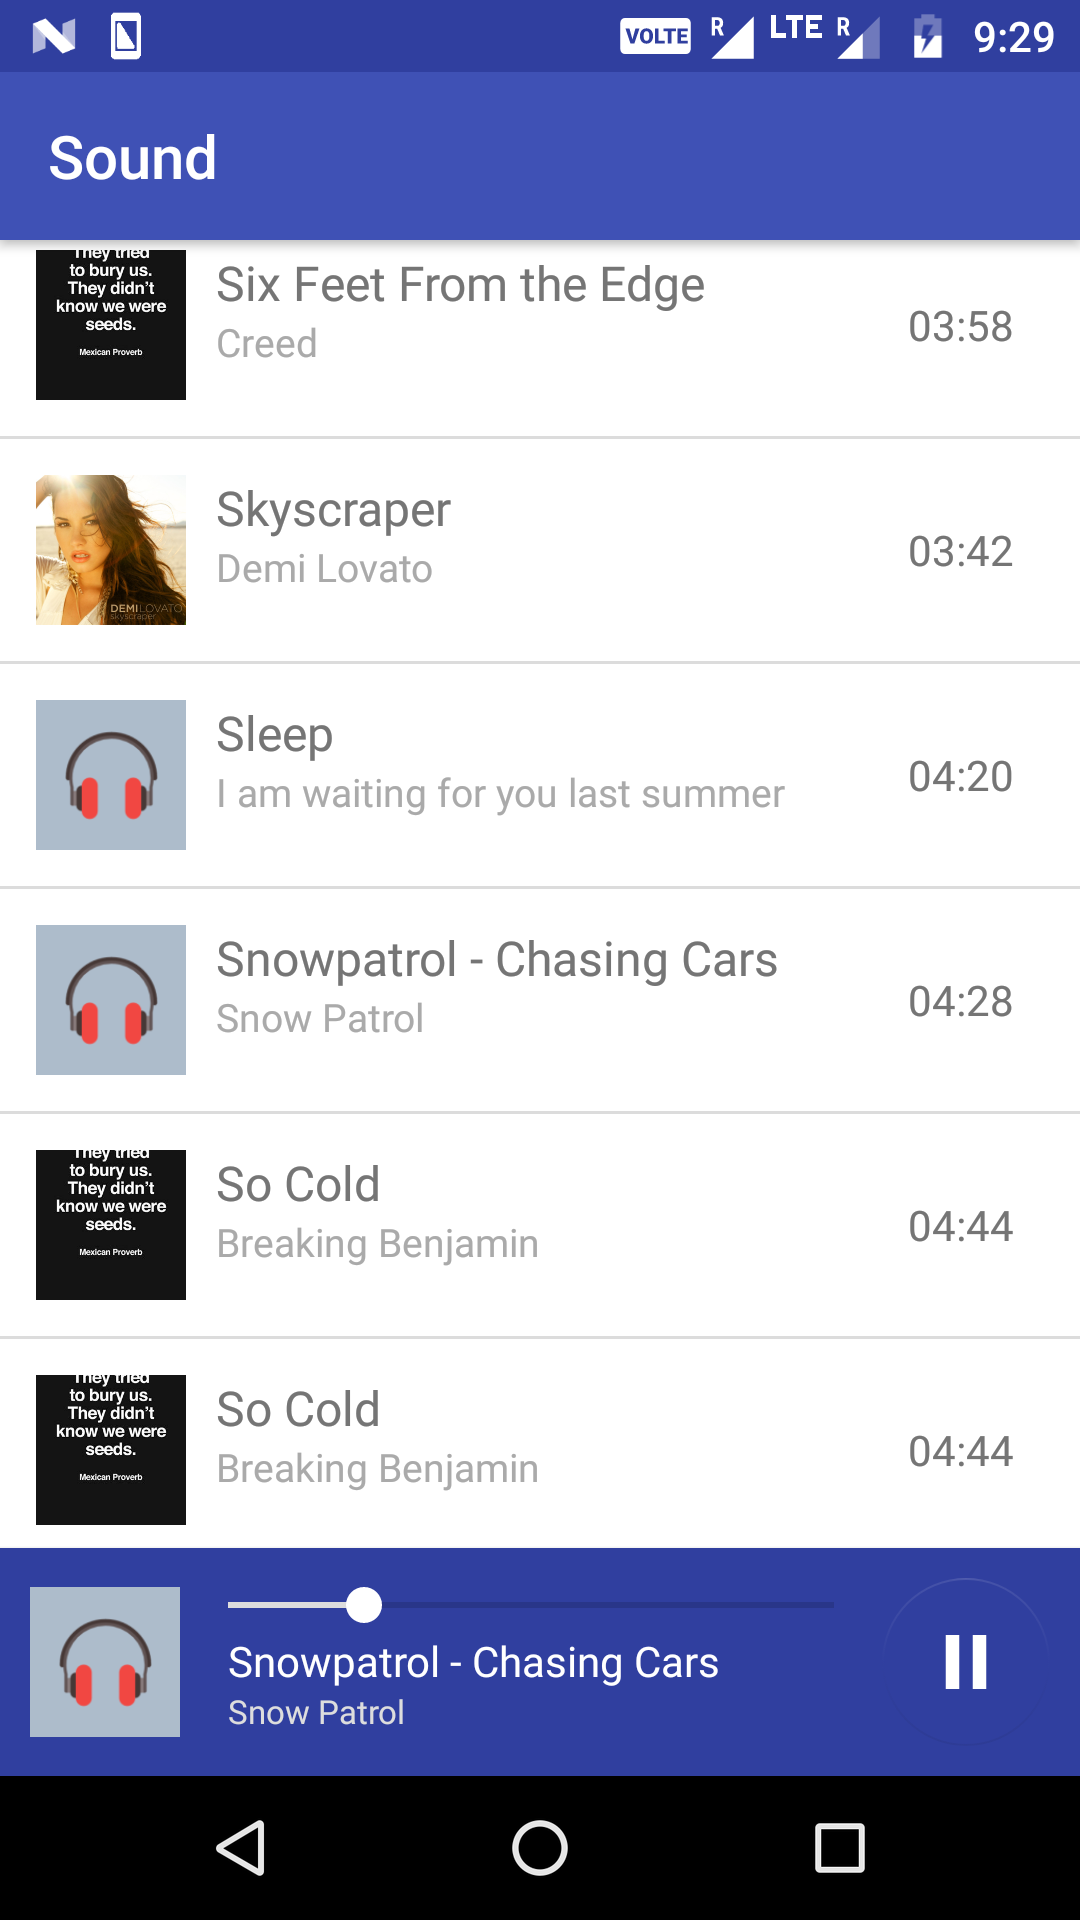 relax sounds app android github